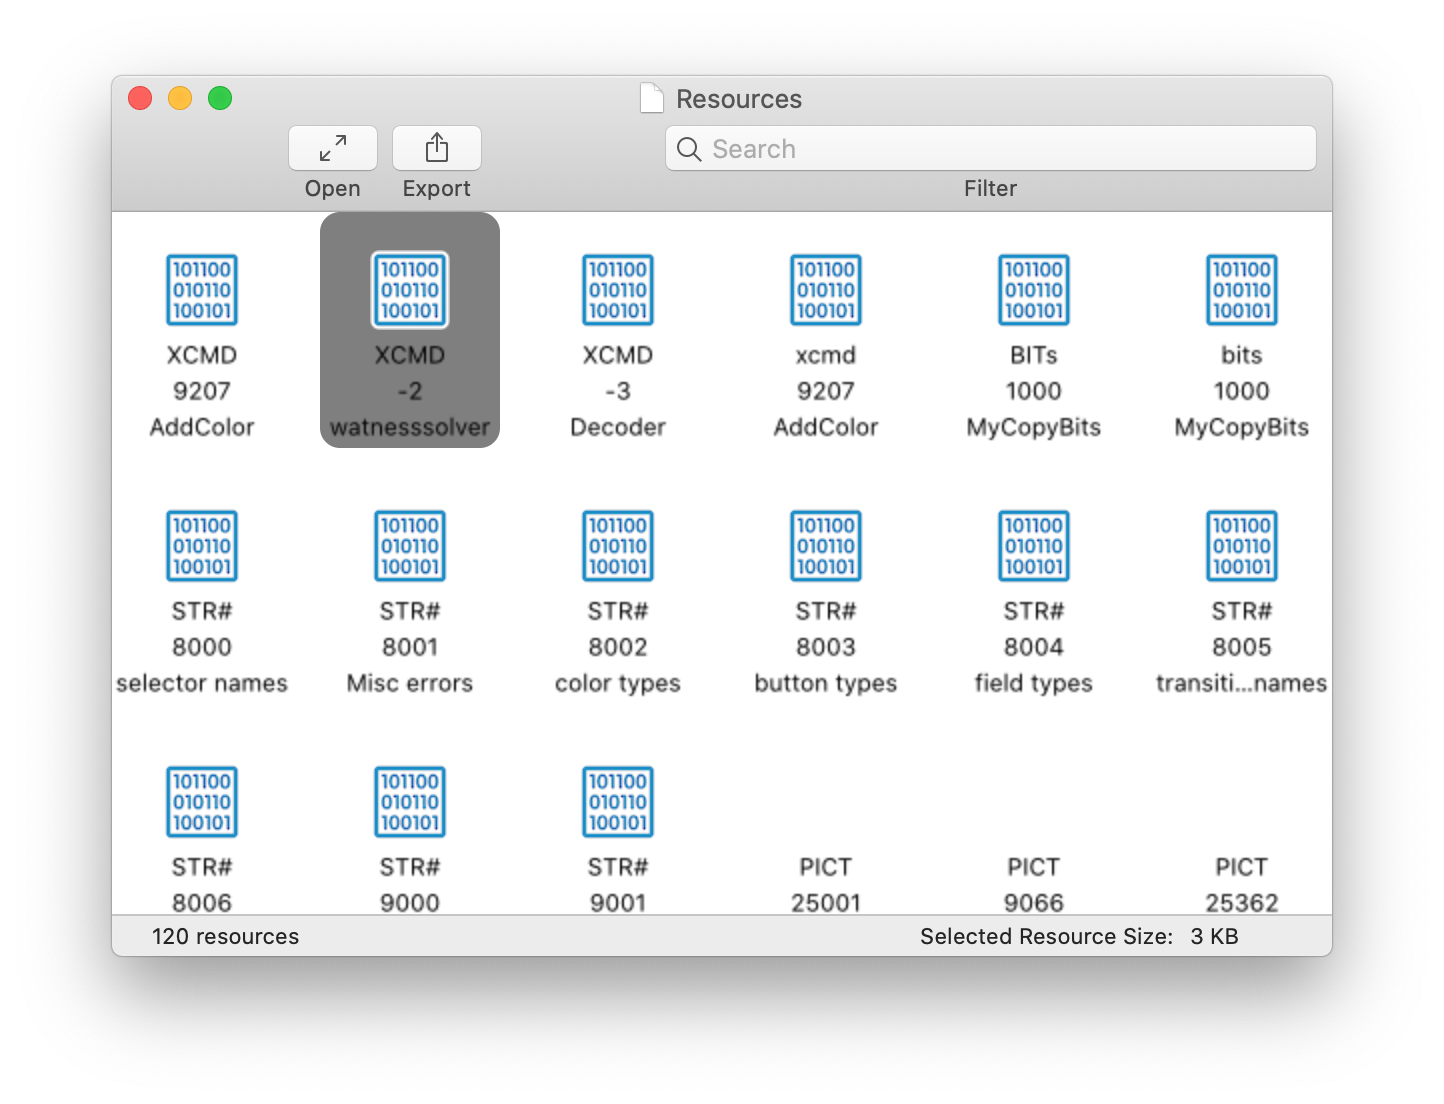 The resources contained in the HyperCard stack, including some BITs, STR#, PICT, and XCMD resources, one of which is watnesssolver